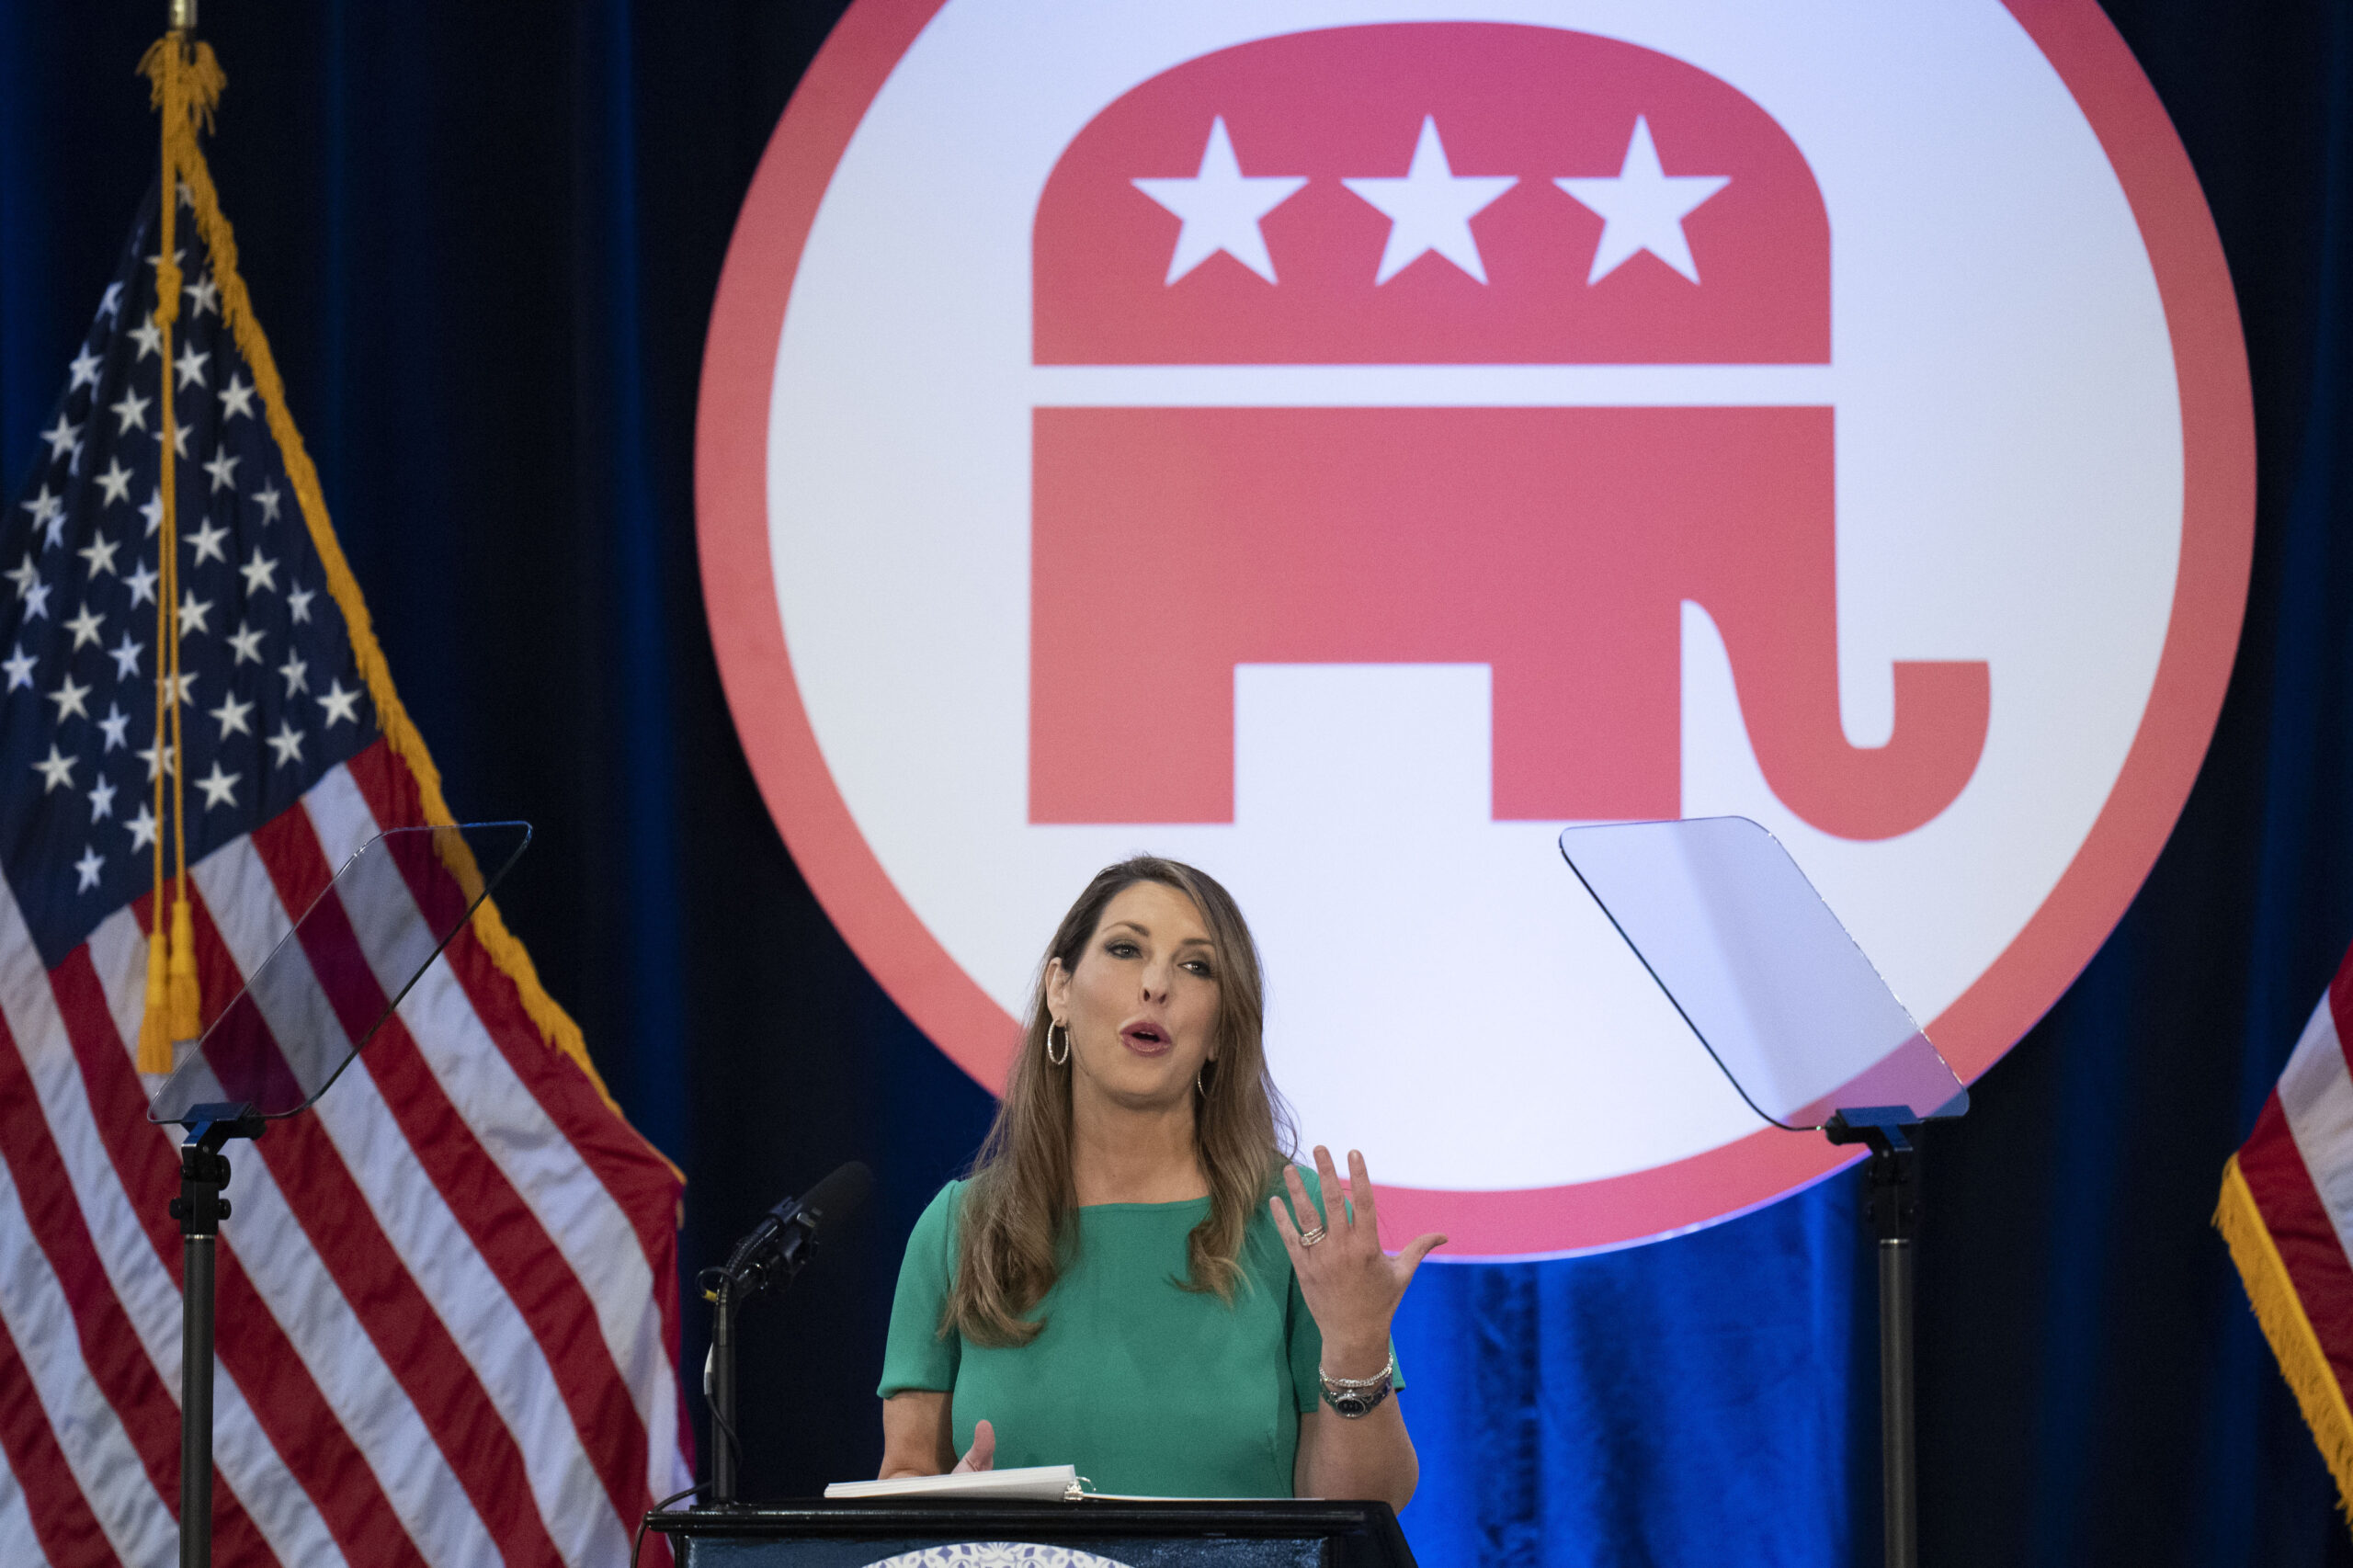 Republican National Committee Chair Ronna McDaniel speaking at a committee meating